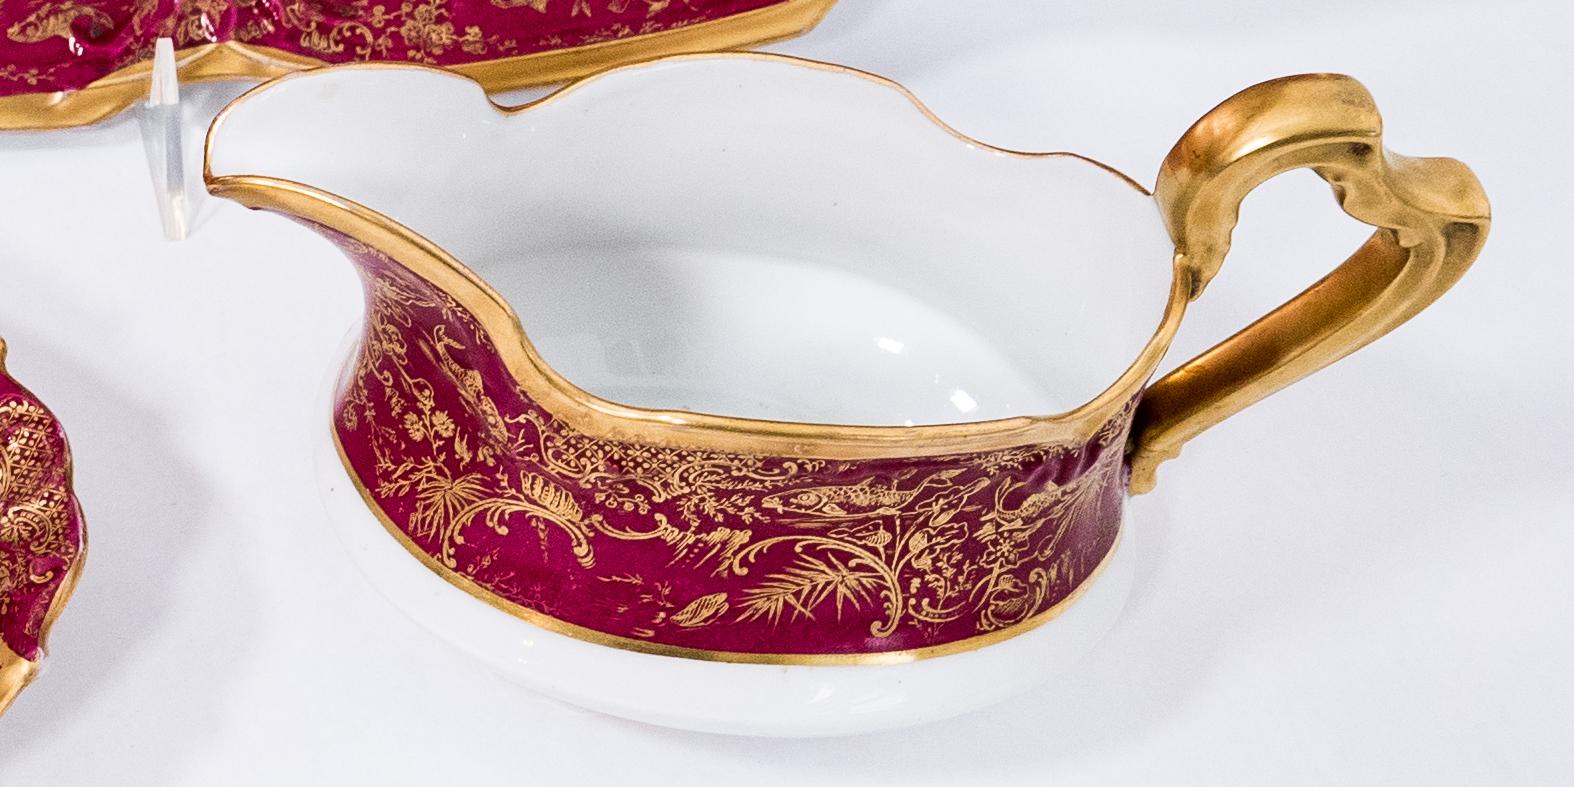 Gold 15 Piece Fish Set with Platter, Sauce Boat & 12 Plates, Antique Limoges Ruby